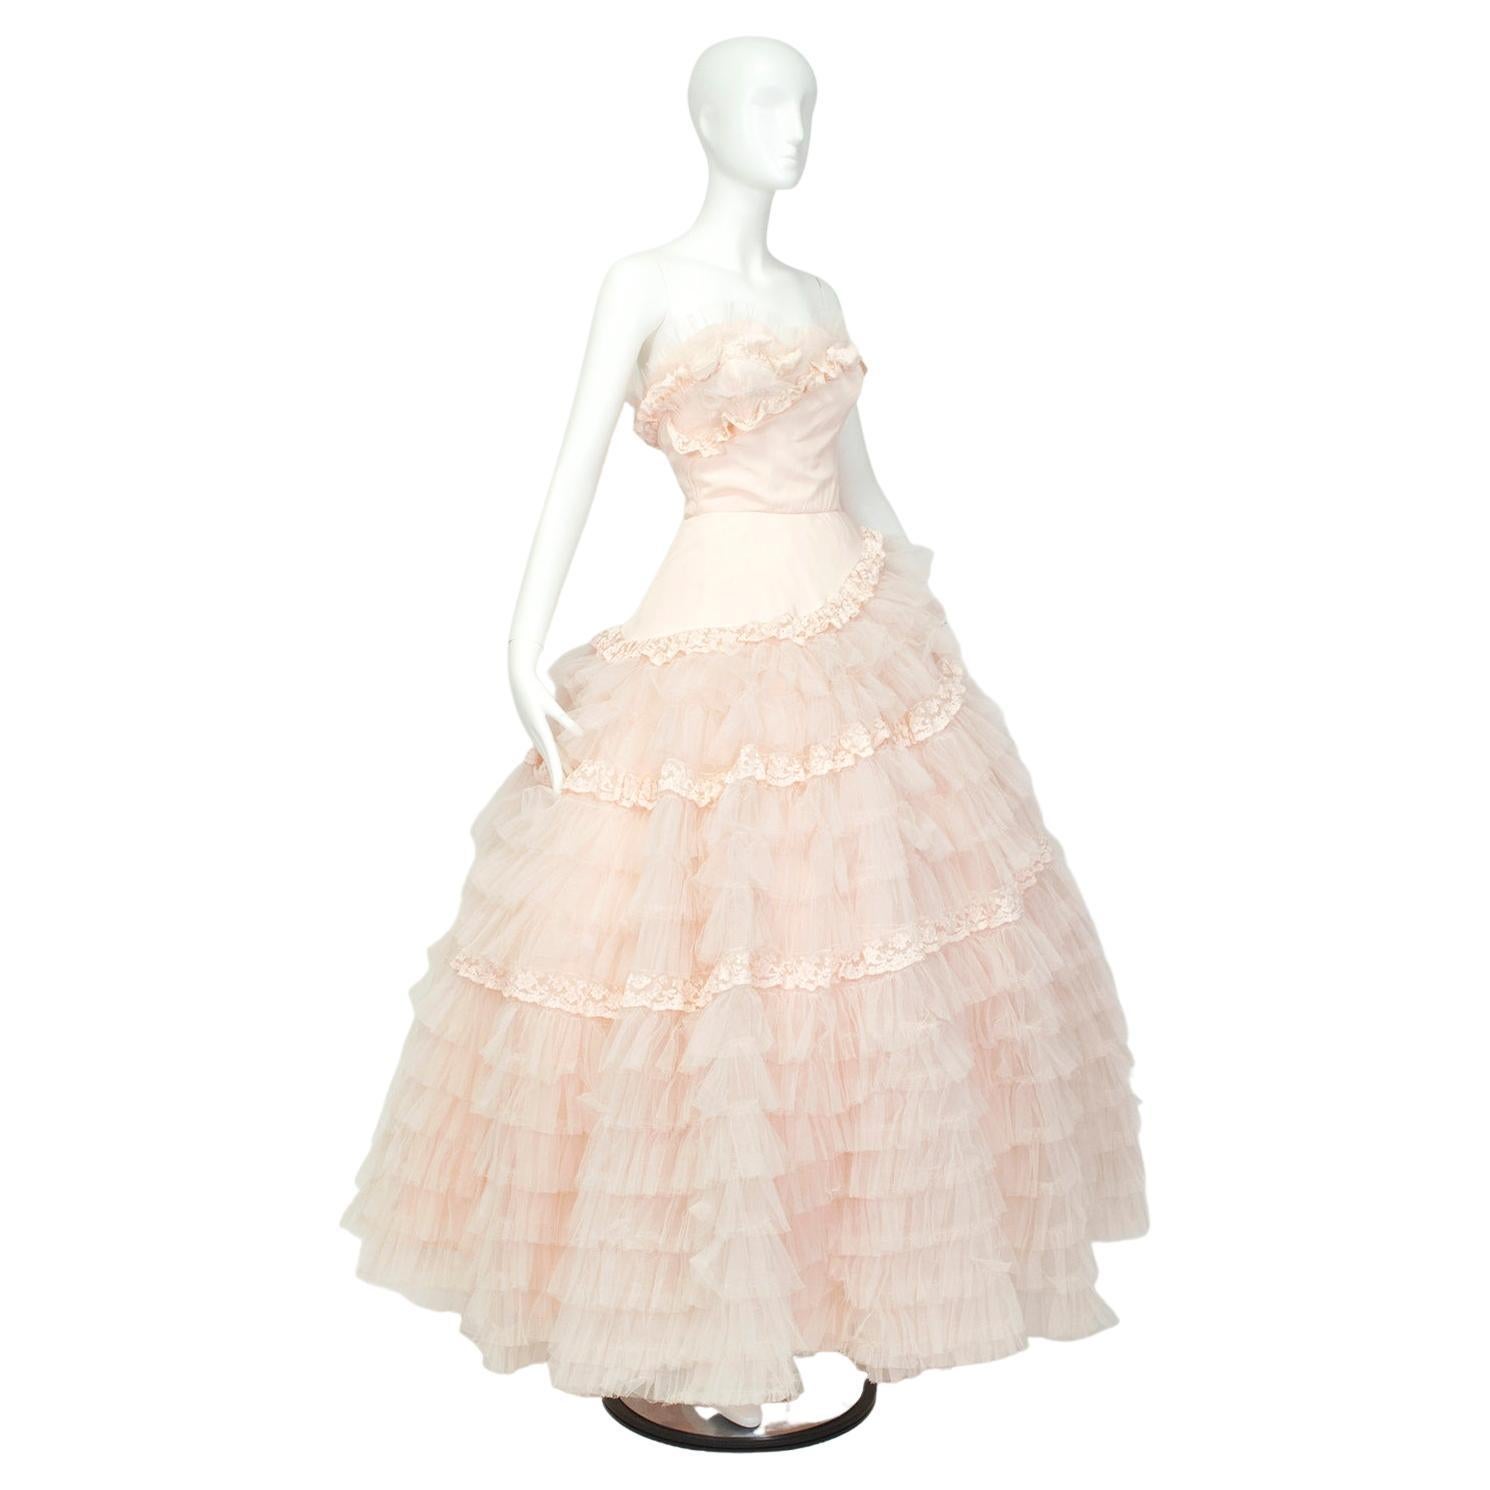 A confection of a gown, from its color to its spiral texture to its 27-foot sweep. Breathtakingly feminine, this dress literally and figuratively dominates every room it enters, and thanks to its whisper pink color it would make a devastating